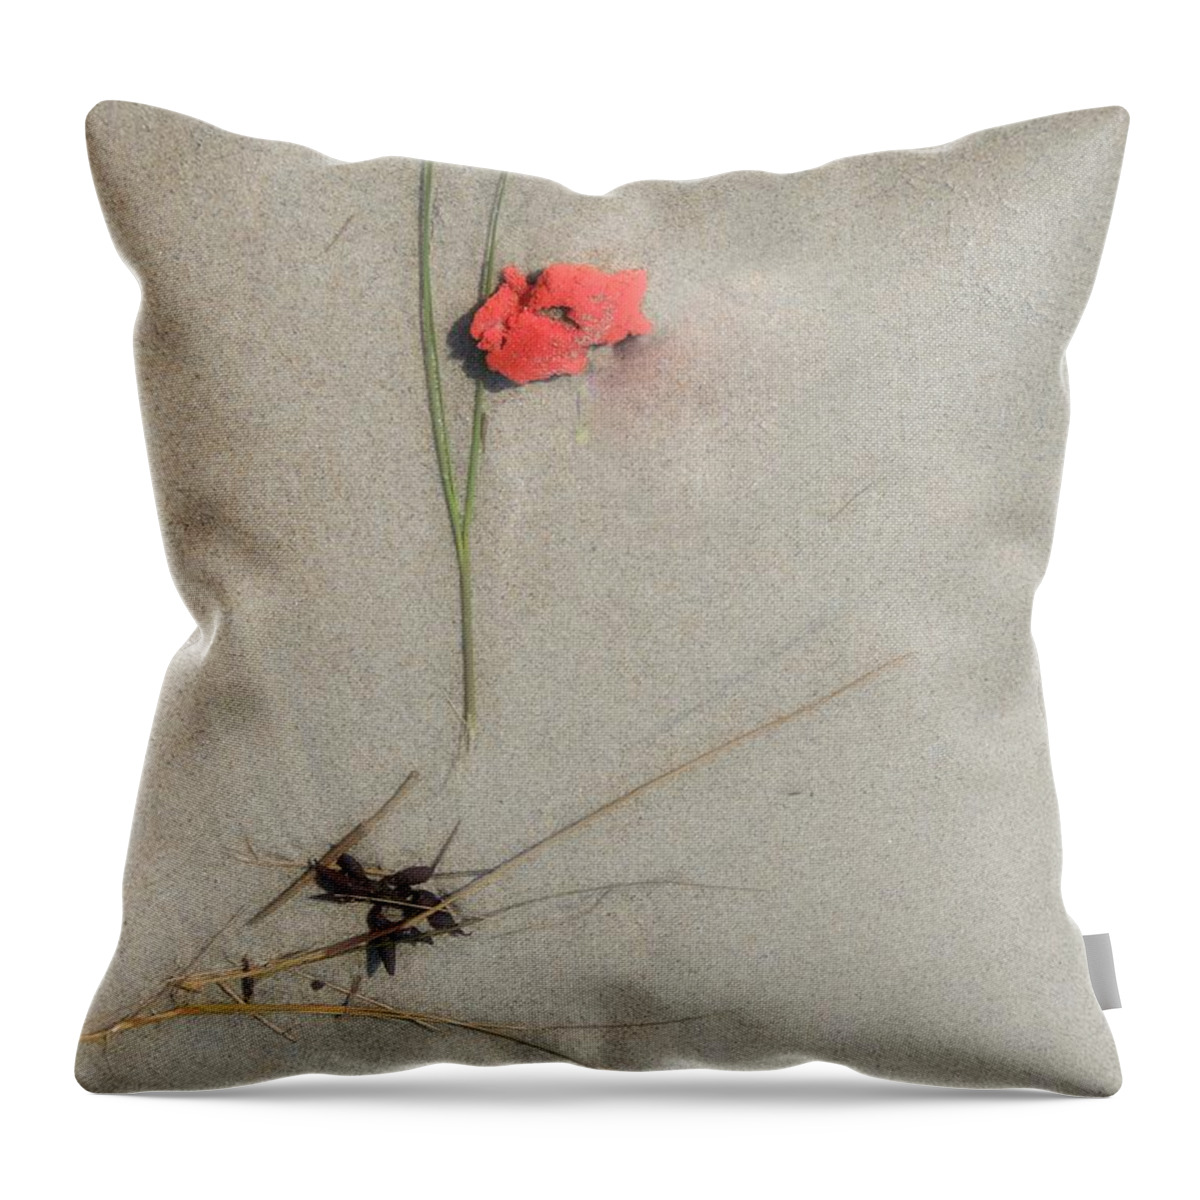 Marcia Lee Jones Throw Pillow featuring the photograph Red Blossom 6 by Marcia Lee Jones